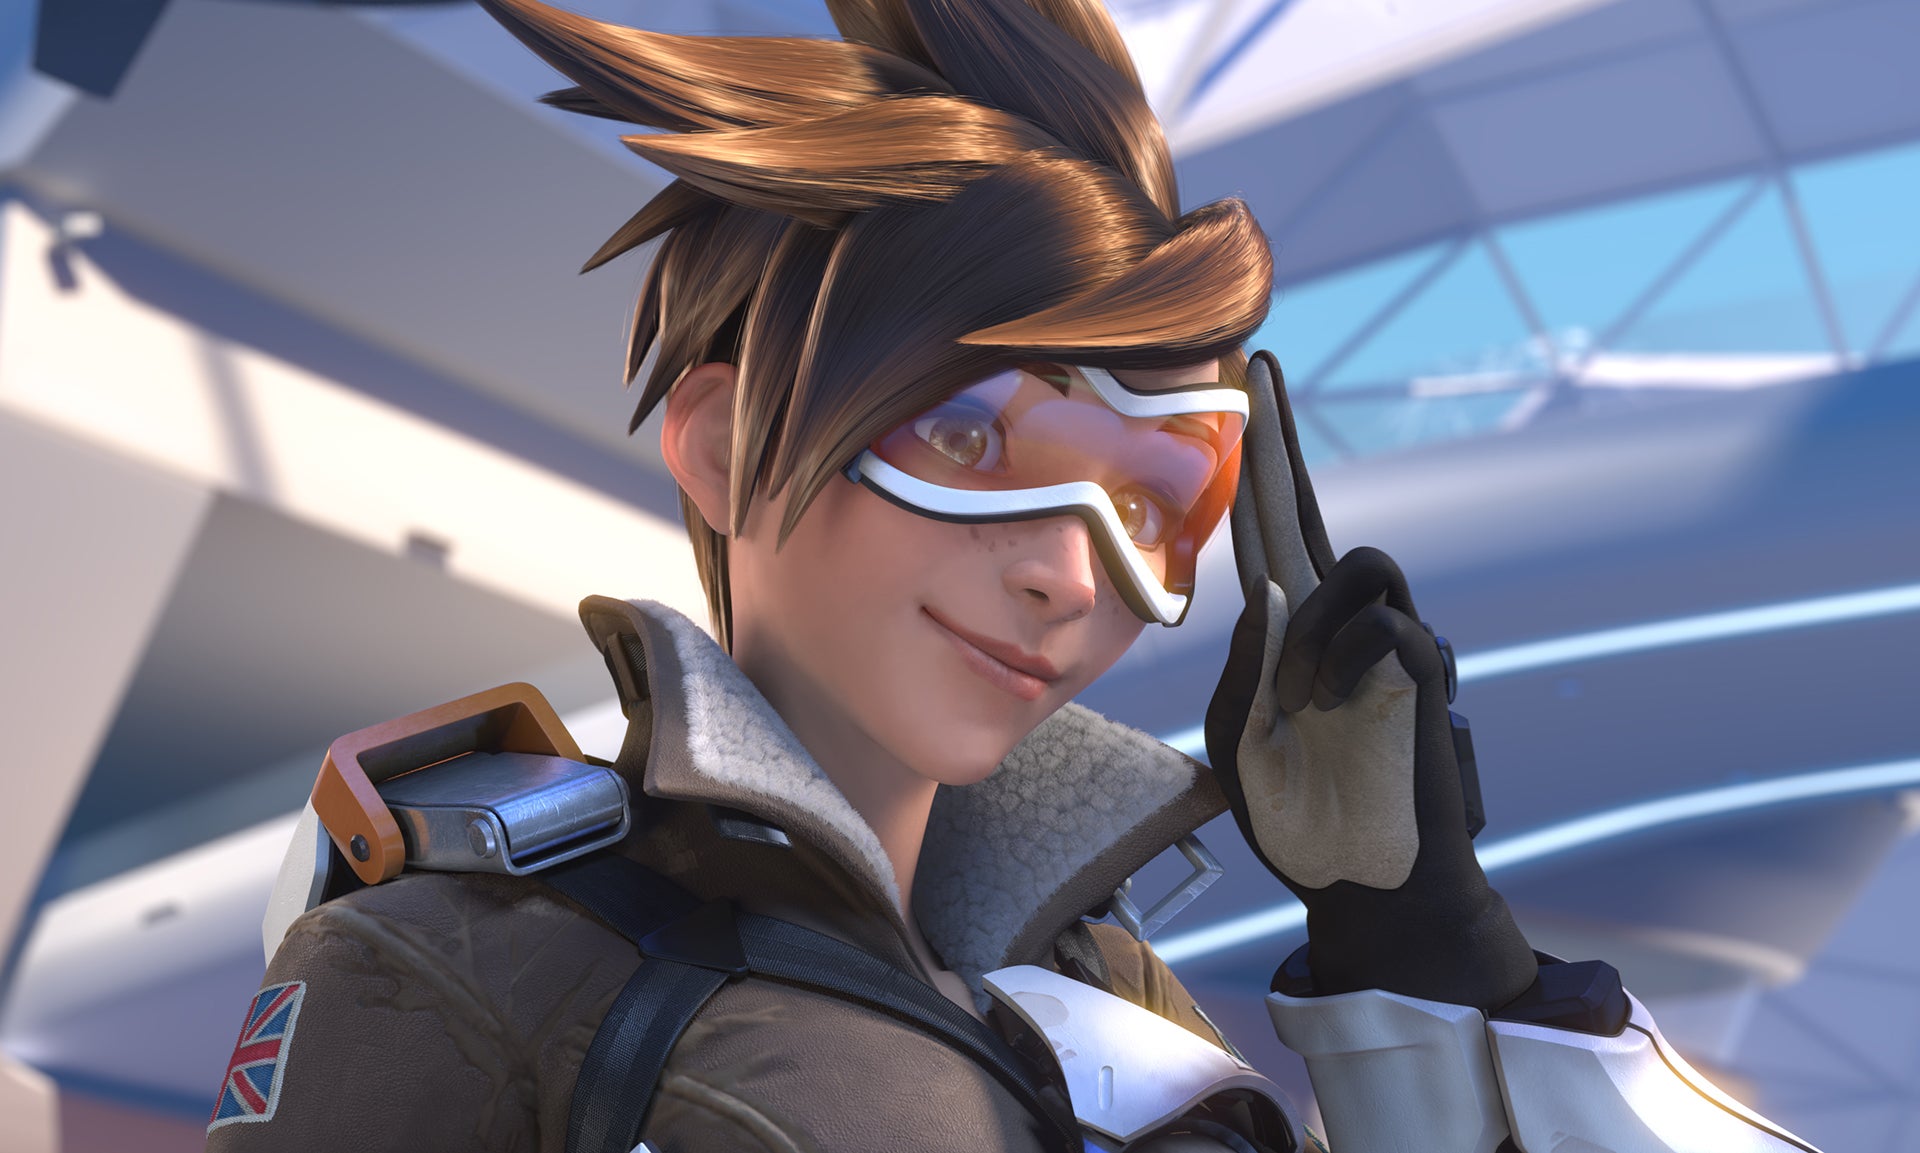 Our Thoughts On Overwatchs Tracer Being Gay